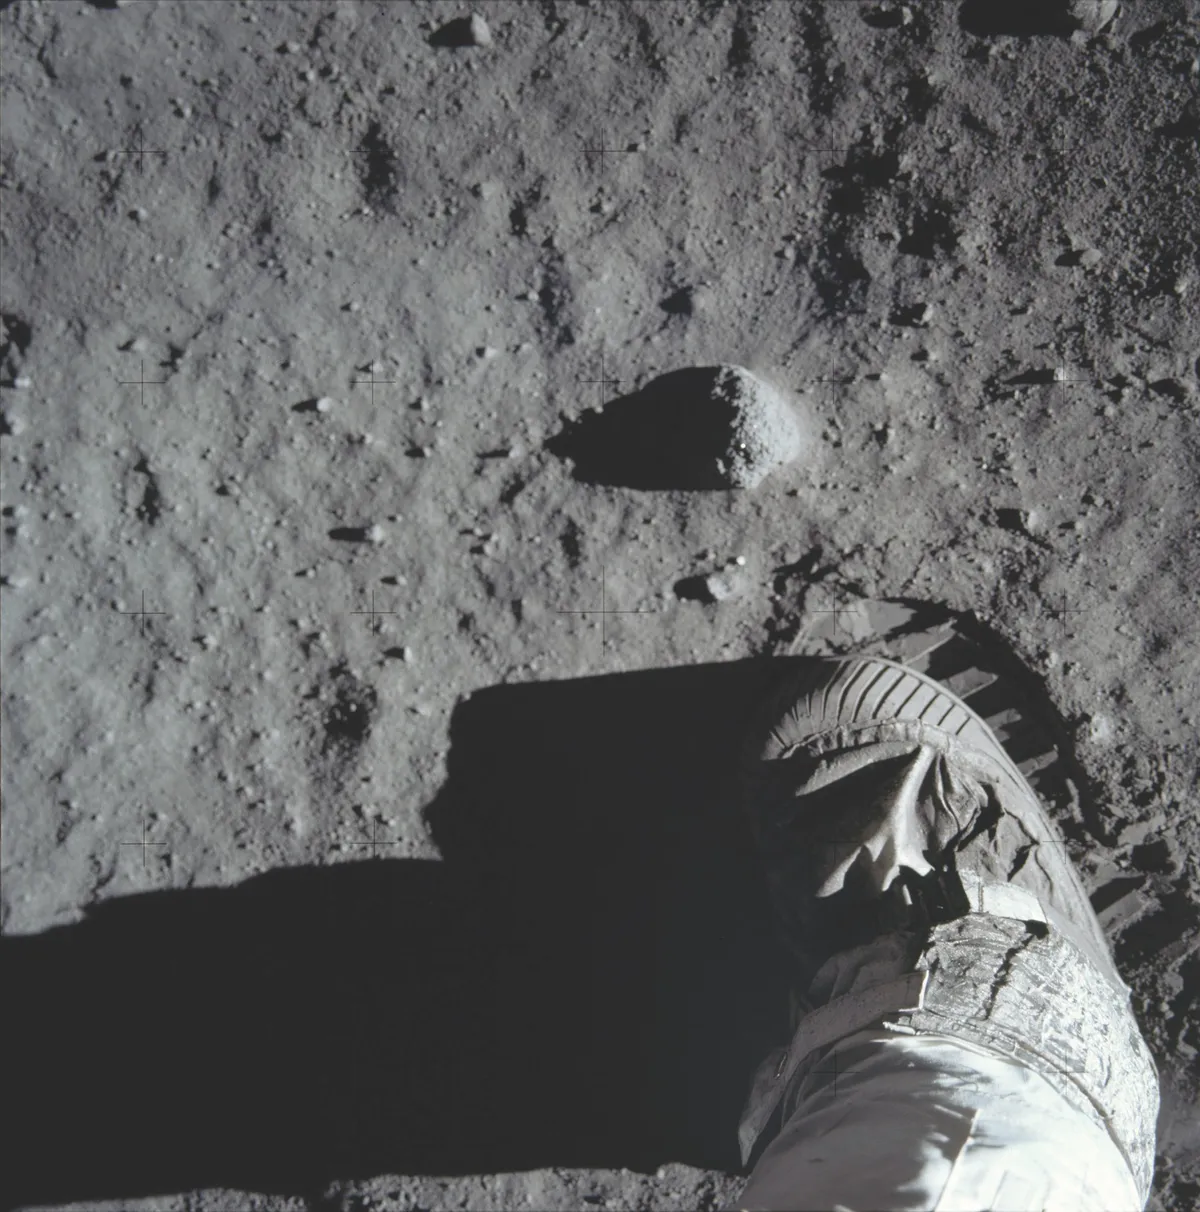 Aldrin photographed the impression his spacesuit’s boot left in the lunar surface so that experts back home could study its soil mechanics. © NASA/JPL